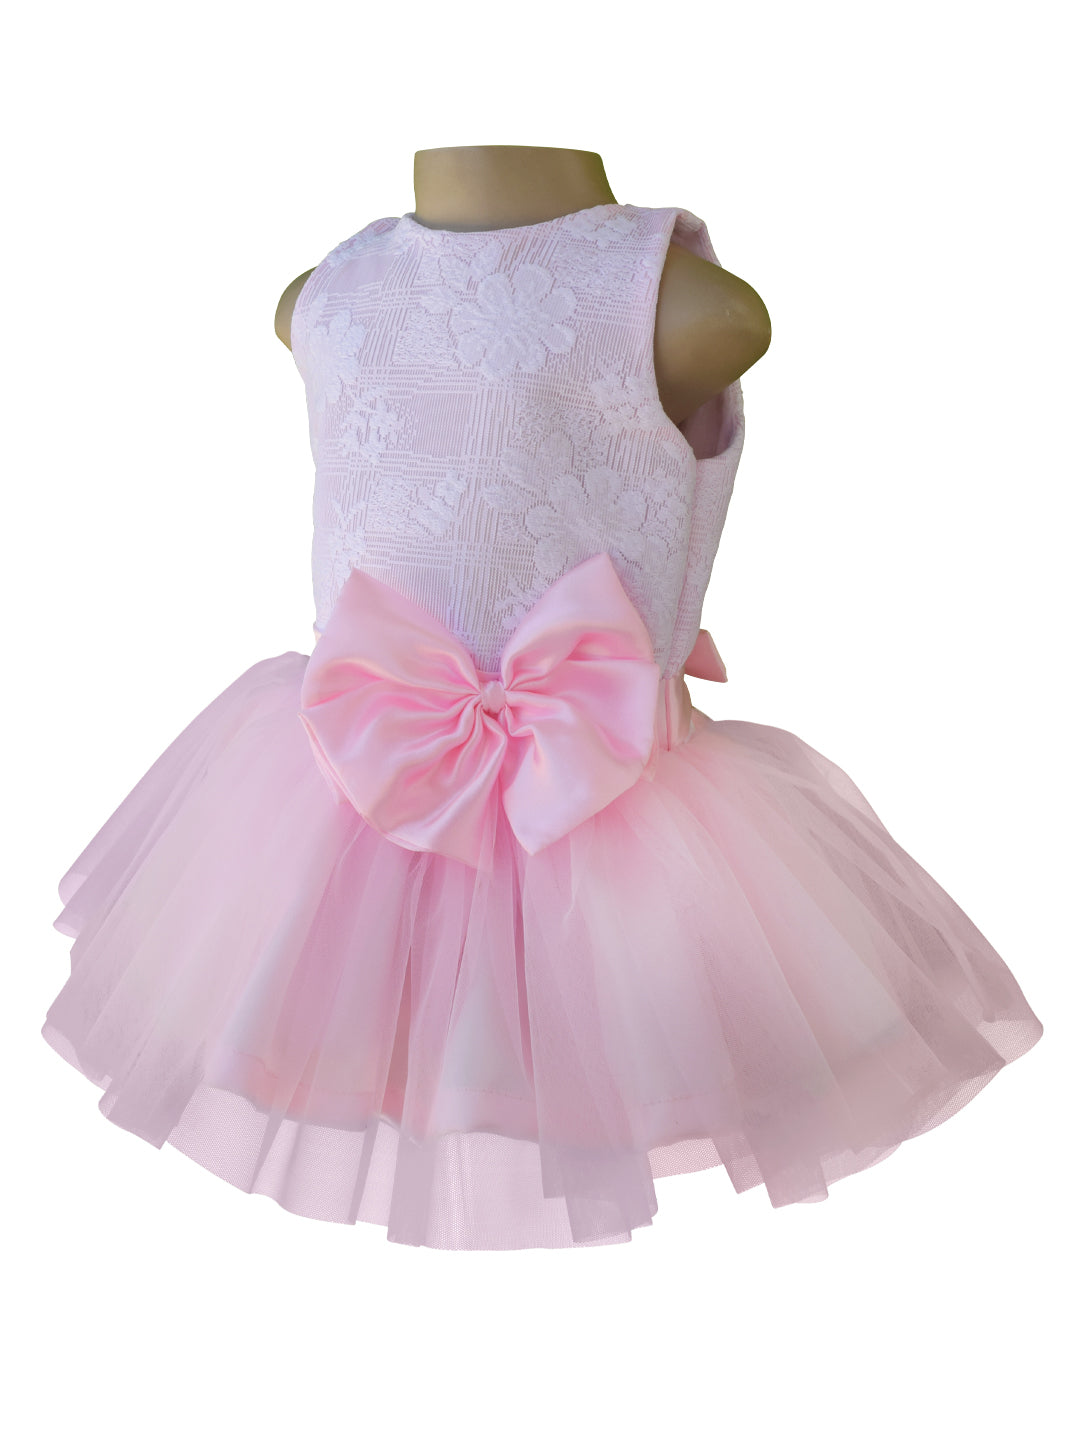 Tutu Dress Price Starting From Rs 1,300/Pc. Find Verified Sellers in Erode  - JdMart